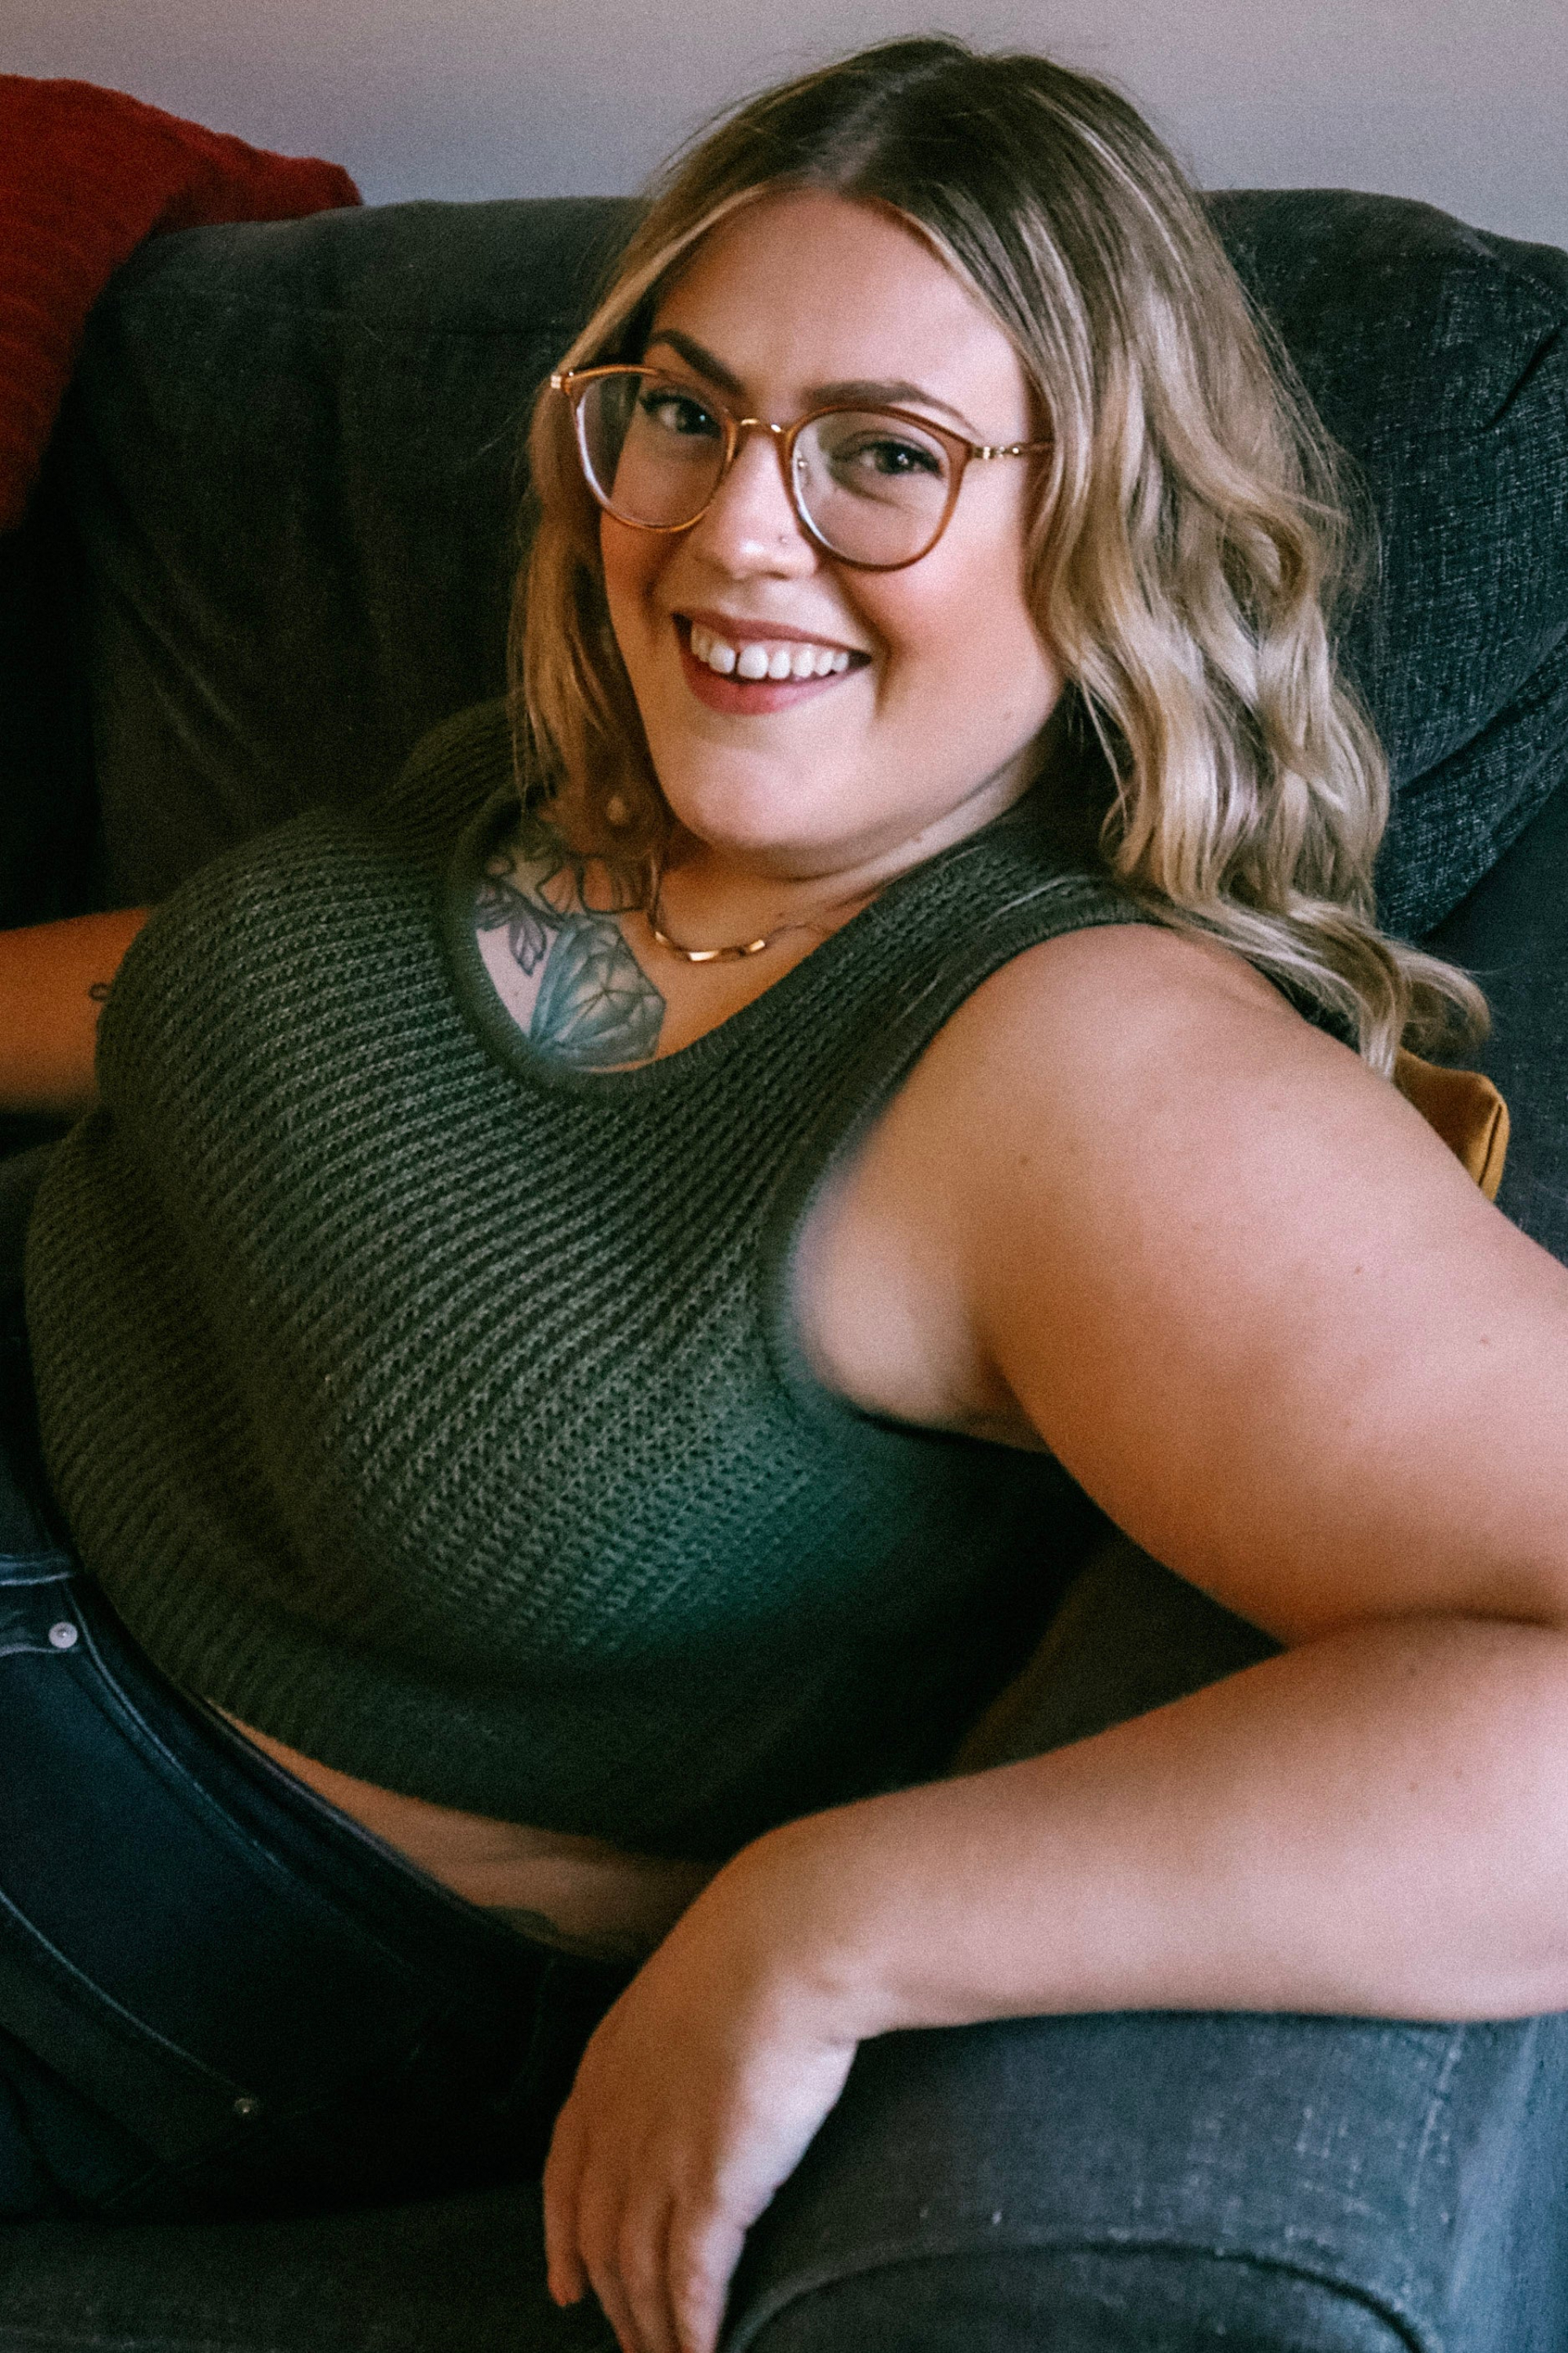 Karli in glasses and green top lounging on a sofa, smiling at the camera